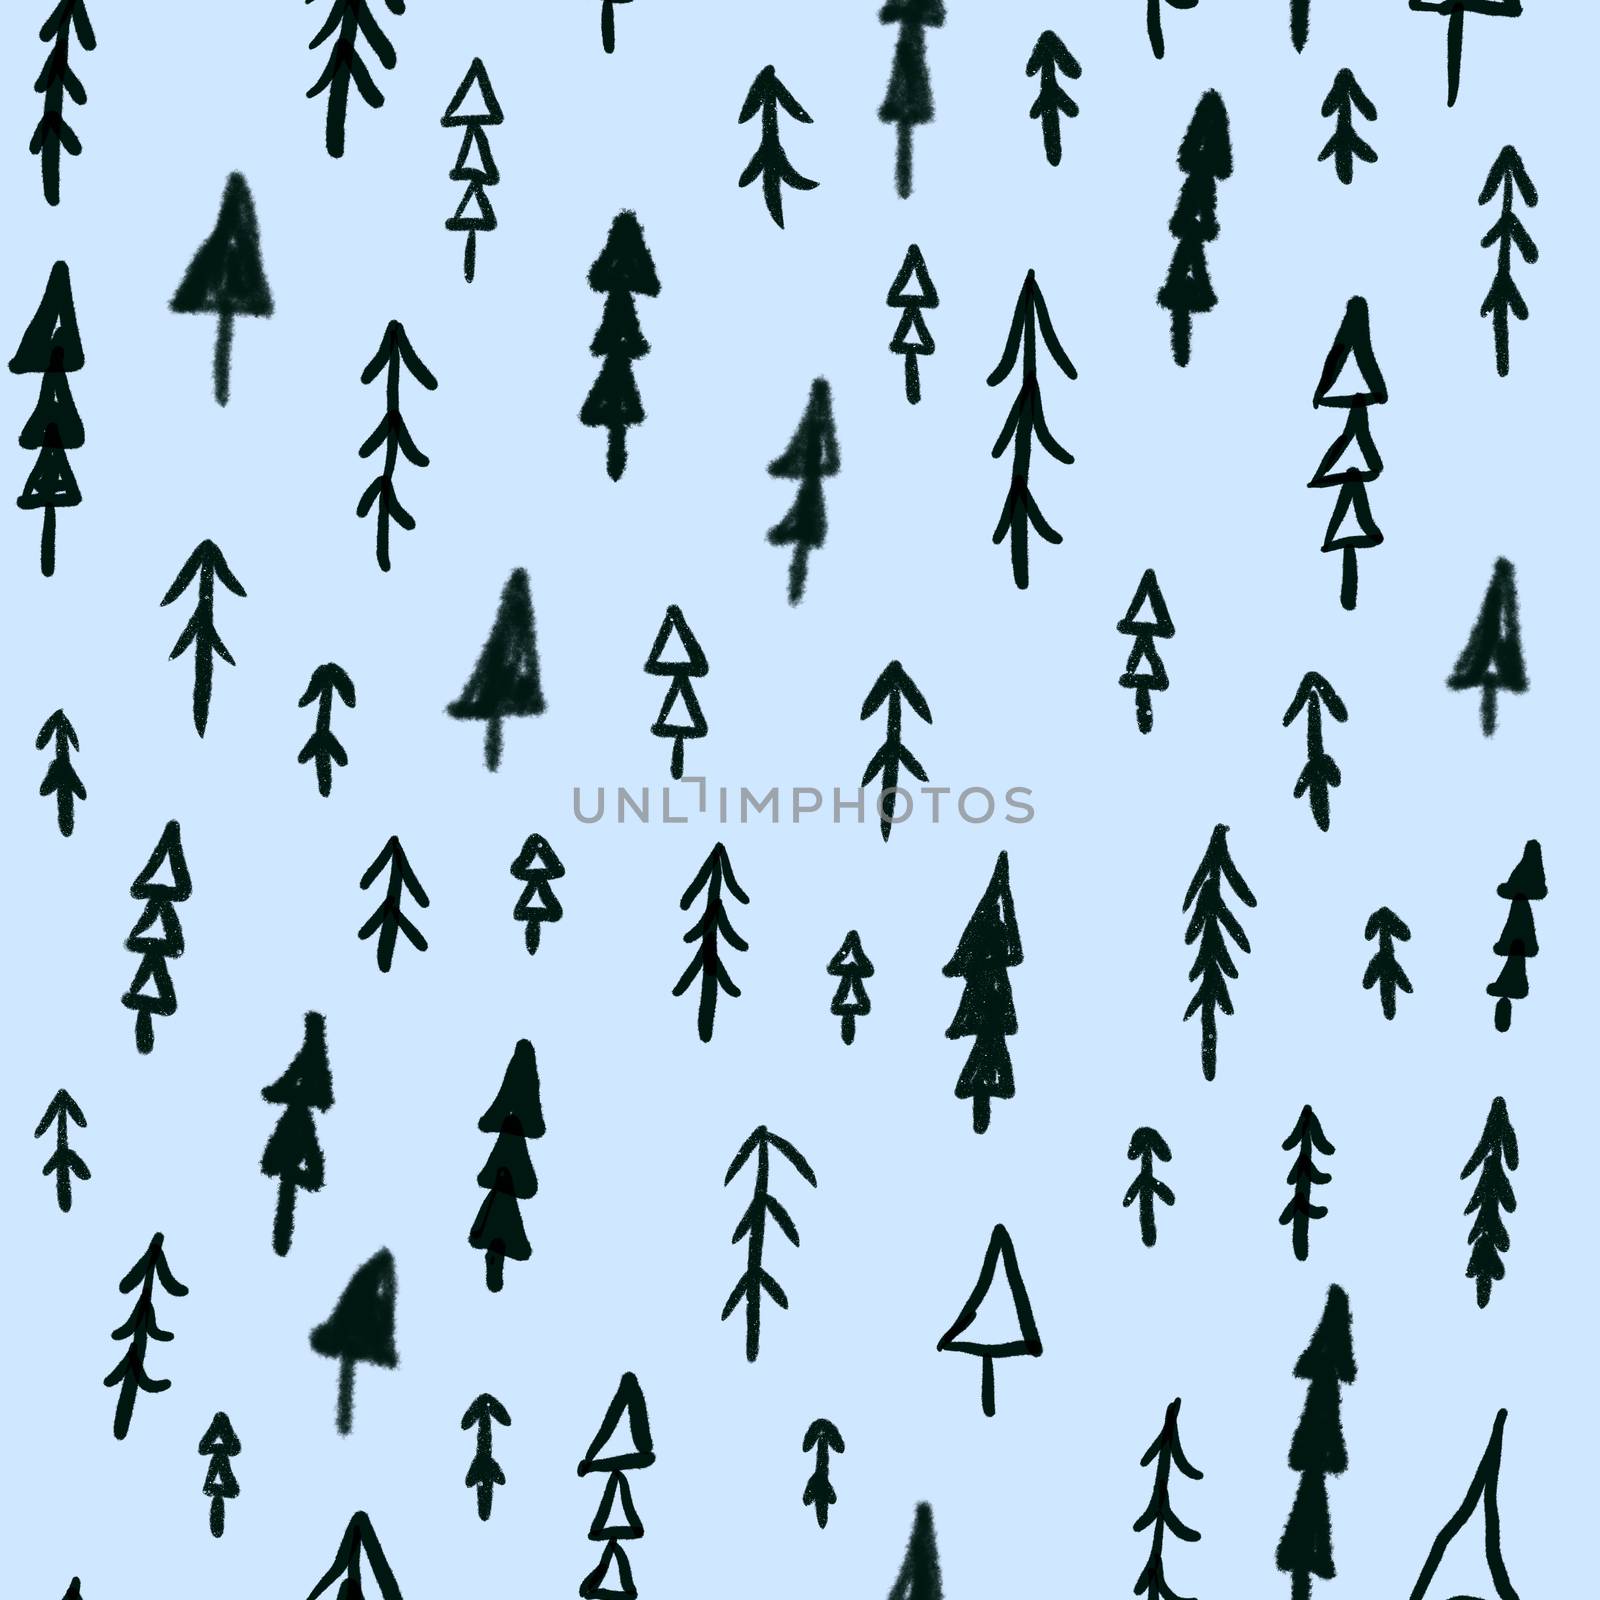 Hand drawn Christmas tree seamless pattern on blue background. Doodle ink repeat pattern design for scrapbooking, cards, wrapping paper, wallpaper.